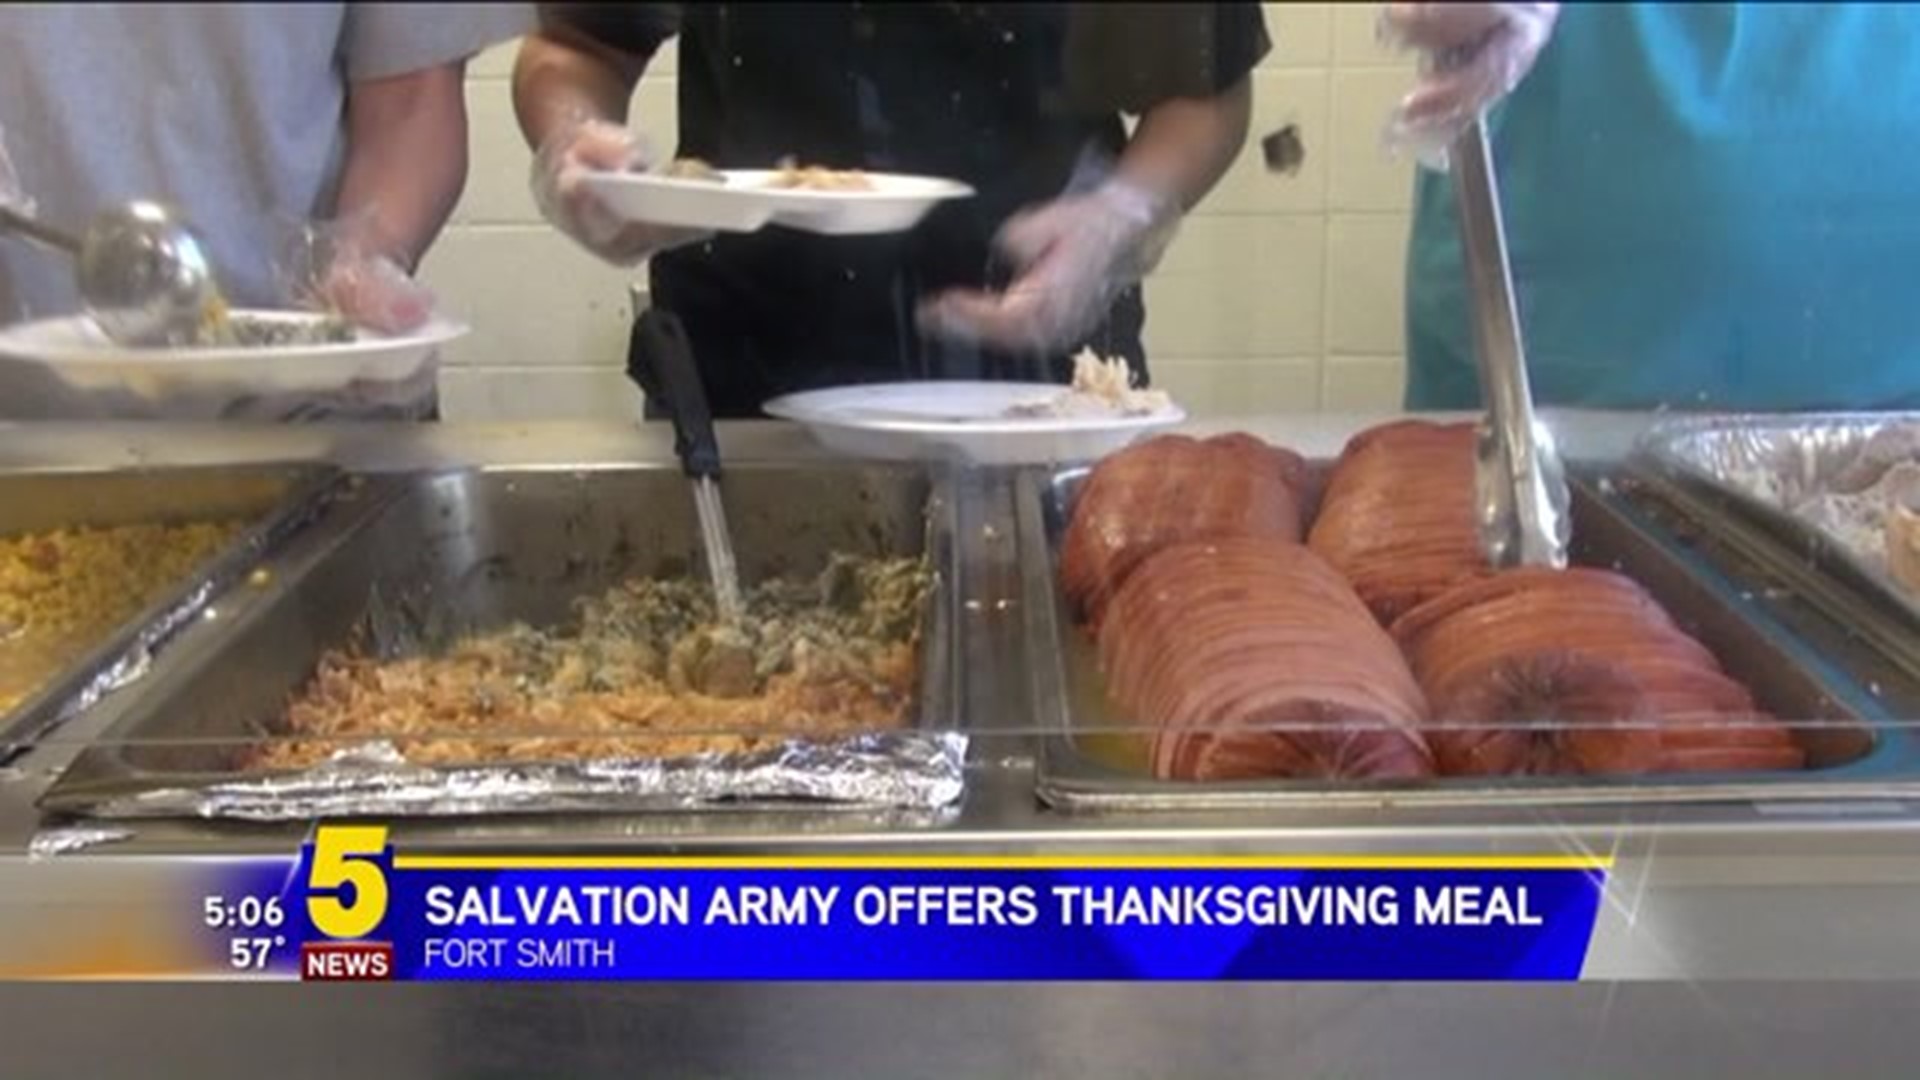 Salvation Army Offers Thanksgiving Meal